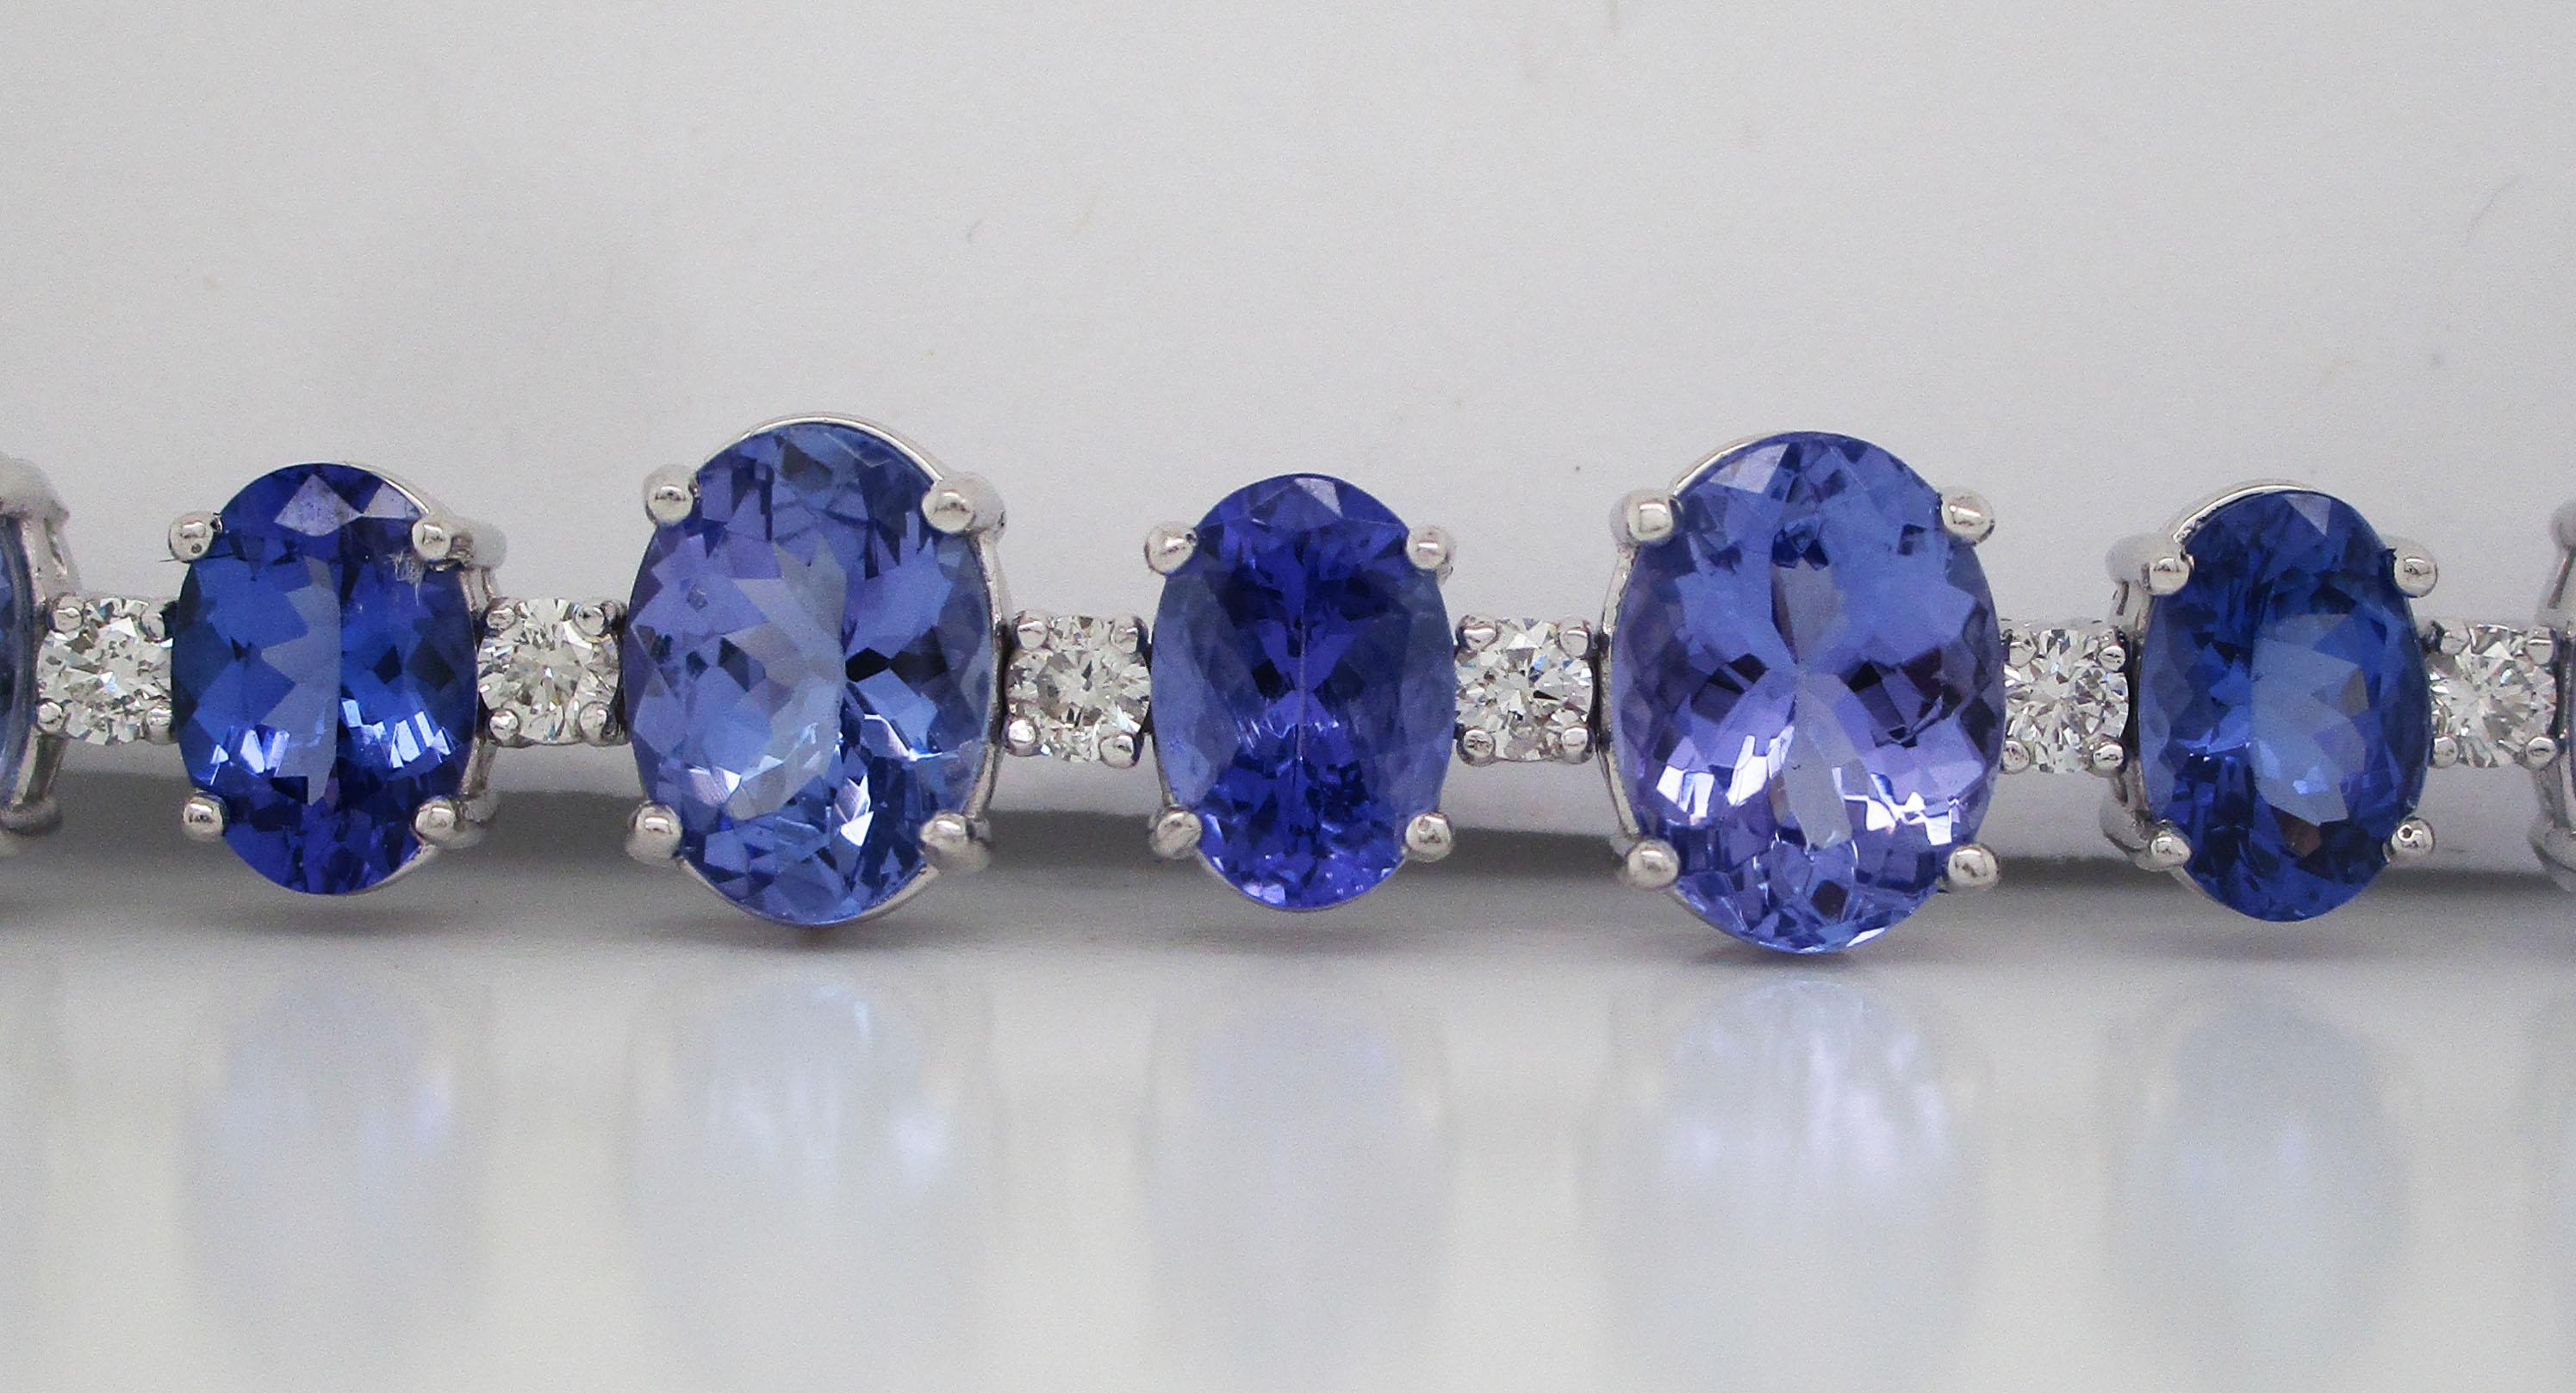 This incredible bracelet is in 14k white gold and features a remarkable array of oval-shaped tanzanite stones in two distinct shades separated by brilliant white diamonds! The beautiful contrast of the two shades of tanzanite and the bright diamonds